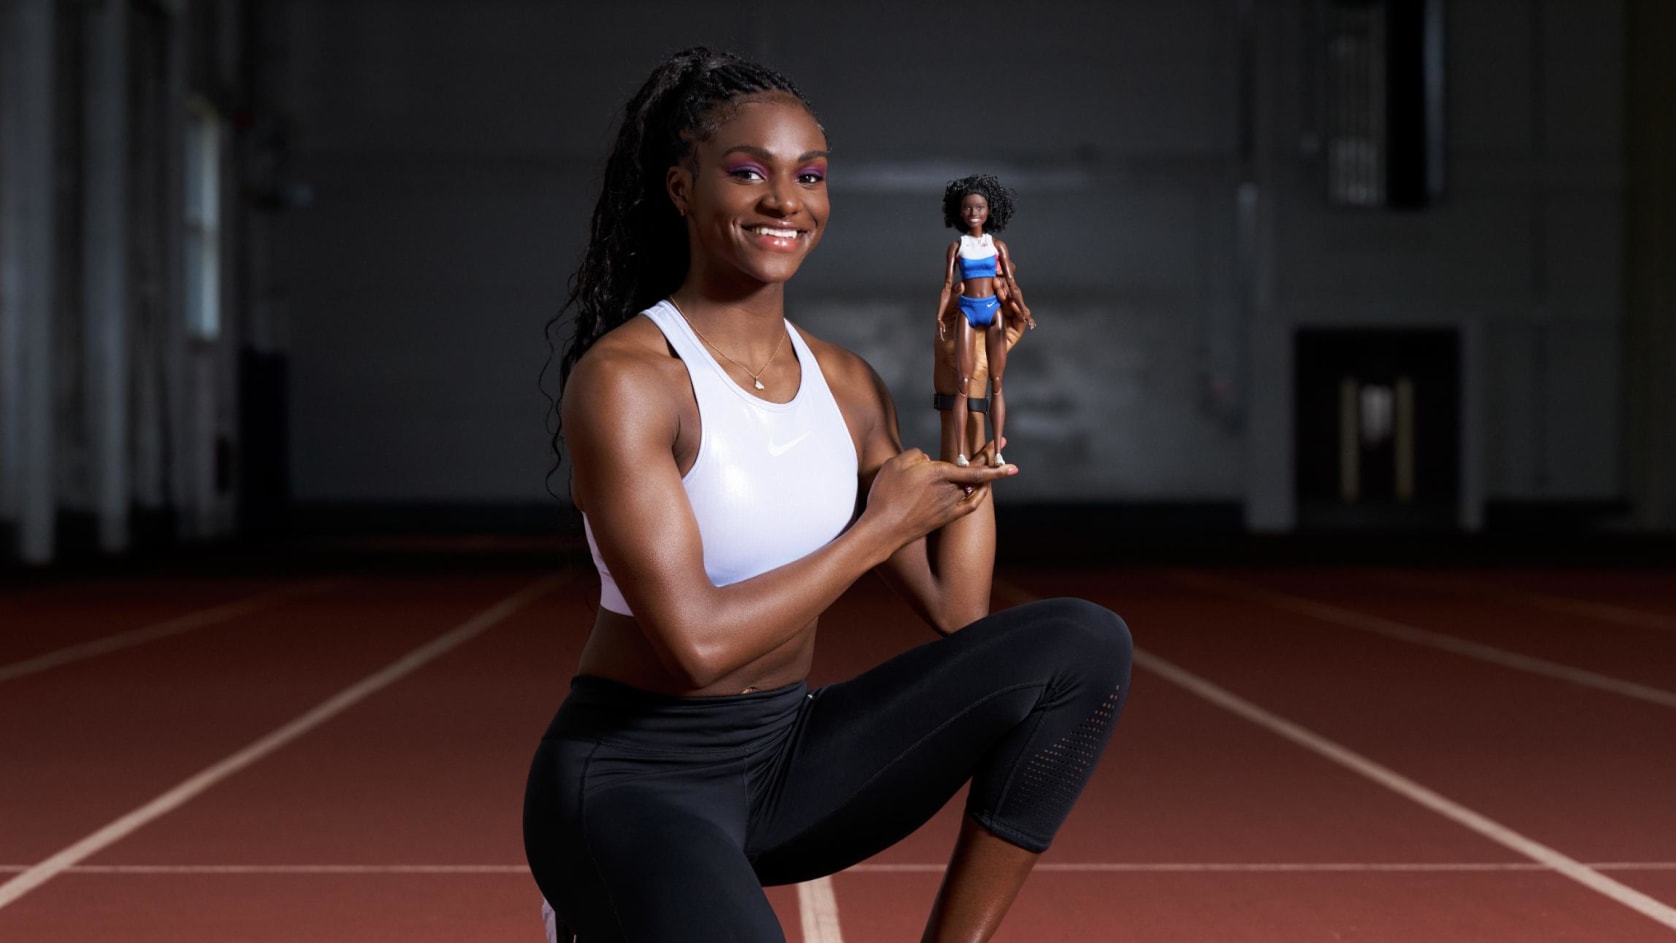 Dina Asher-Smith on the track holding her Barbie